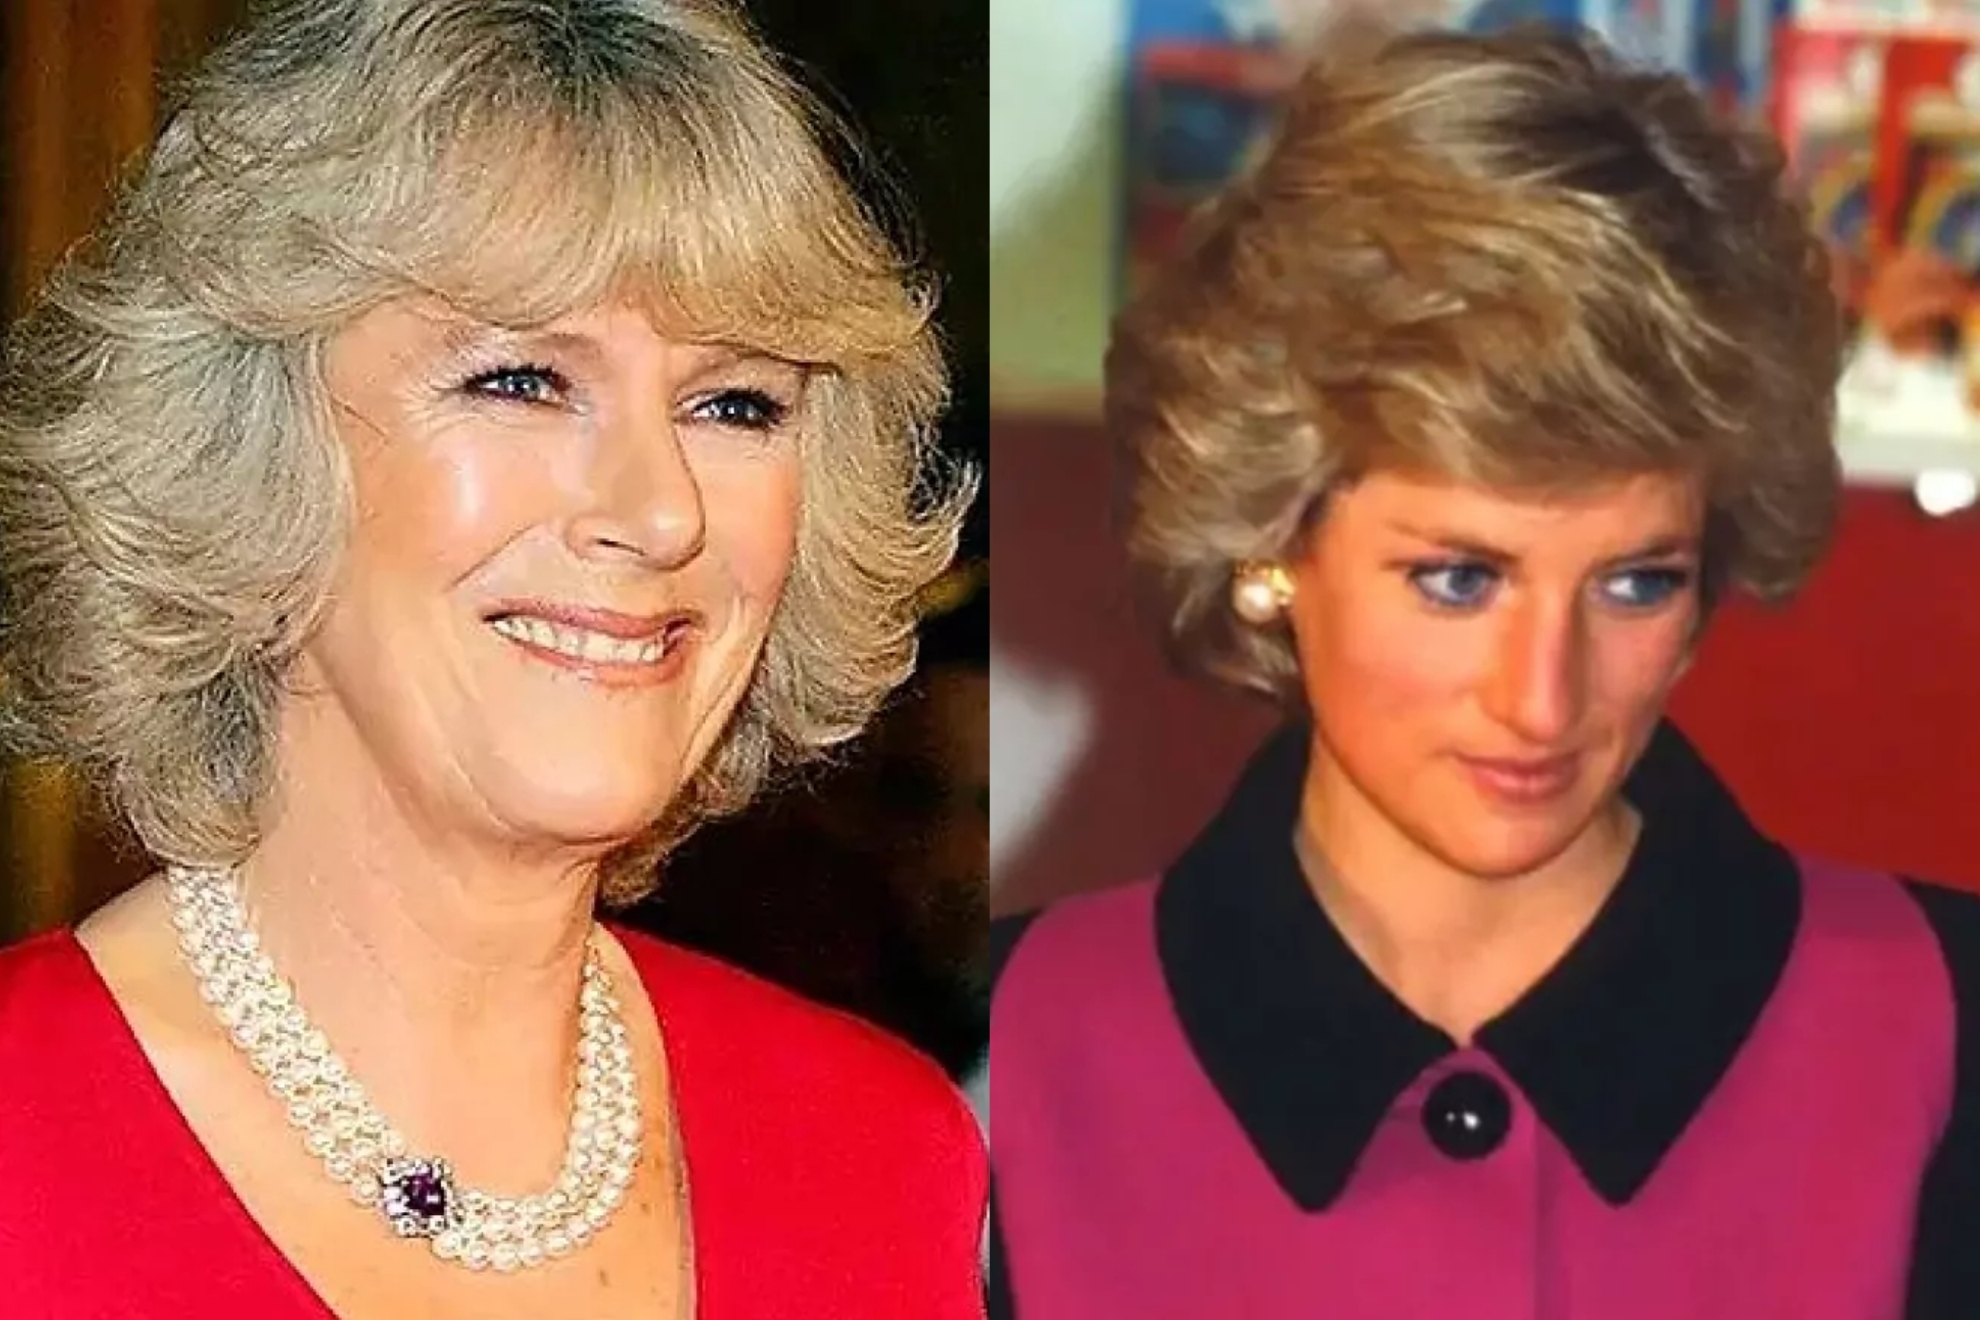 Mashup picture of Queen Consort Camilla and Princess Diana